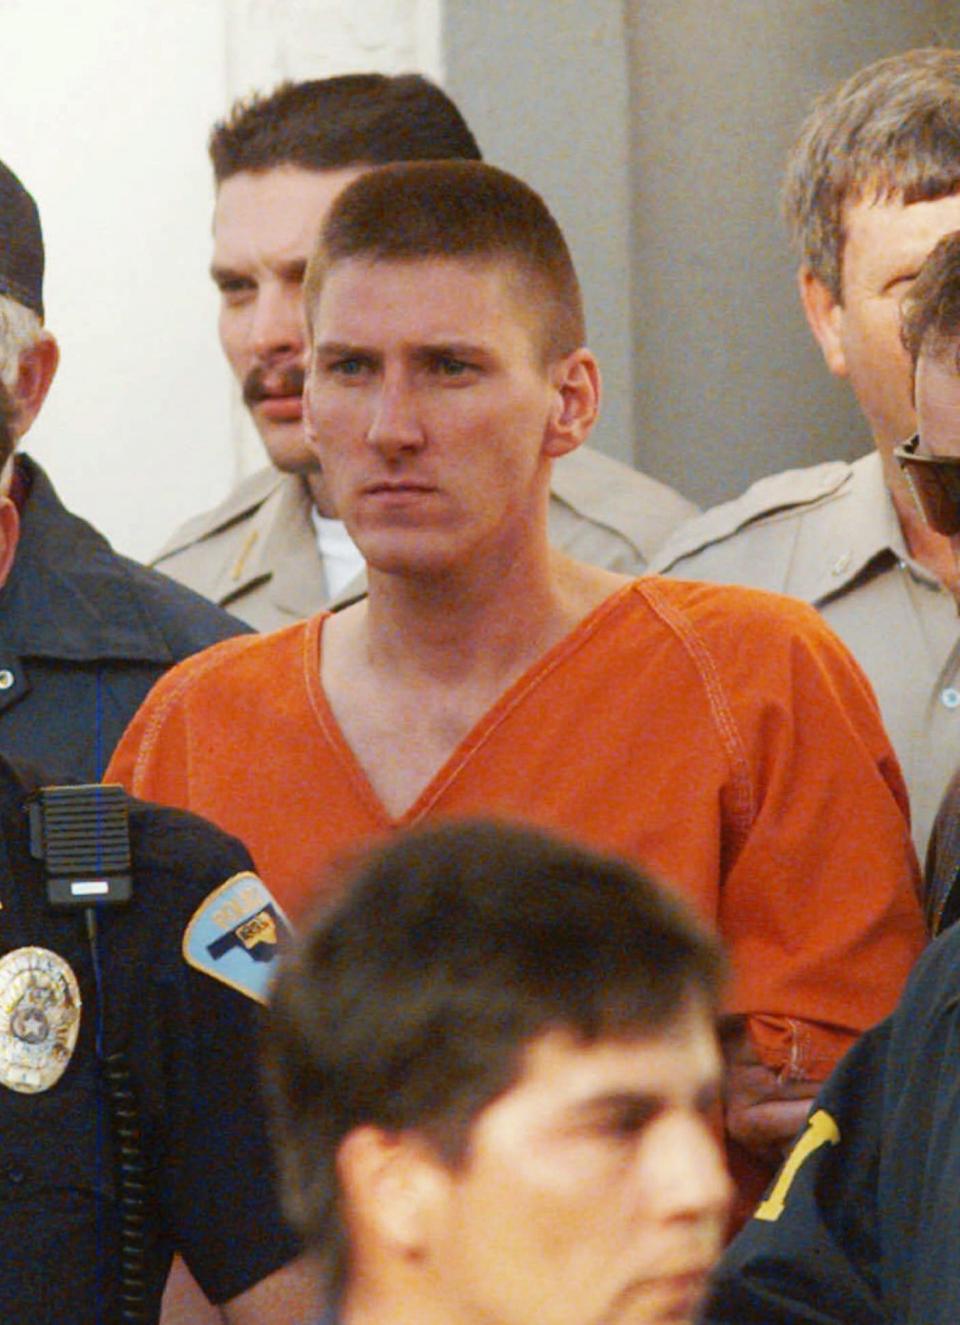 FILE - In this April 21, 1995, file photo, Oklahoma City bombing suspect Timothy McVeigh is escorted by law enforcement officials from the Noble County Courthouse in Perry, Okla., Friday, April 21, 1995. The April 19 bombing of the Alfred P. Murrah Federal Building claimed the lives of 168 people. McVeigh was convicted June 2, 1997, of blowing up the building. The Oklahoma City National Memorial and Museum has scaled back its plans for a 25th anniversary remembrance amid the coronavirus outbreak and will instead offer a recorded, one-hour television program that includes the reading of the names of the 168 people killed in the bombing followed by 168 seconds of silence. (AP Photo/David Longstreath, File)